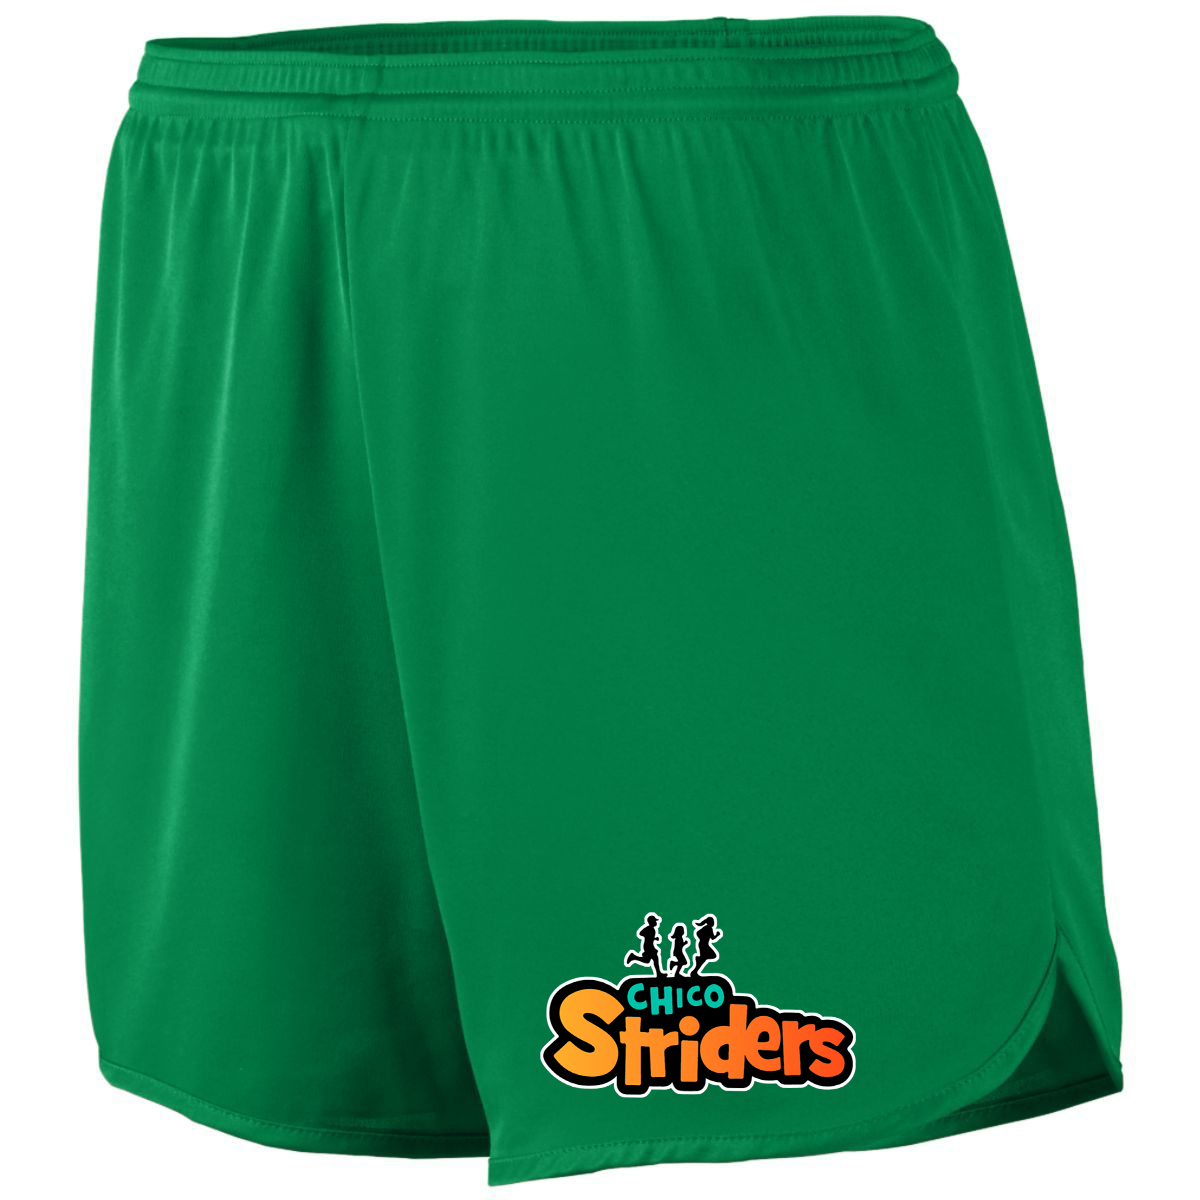 Chico Striders Accelerate Shorts